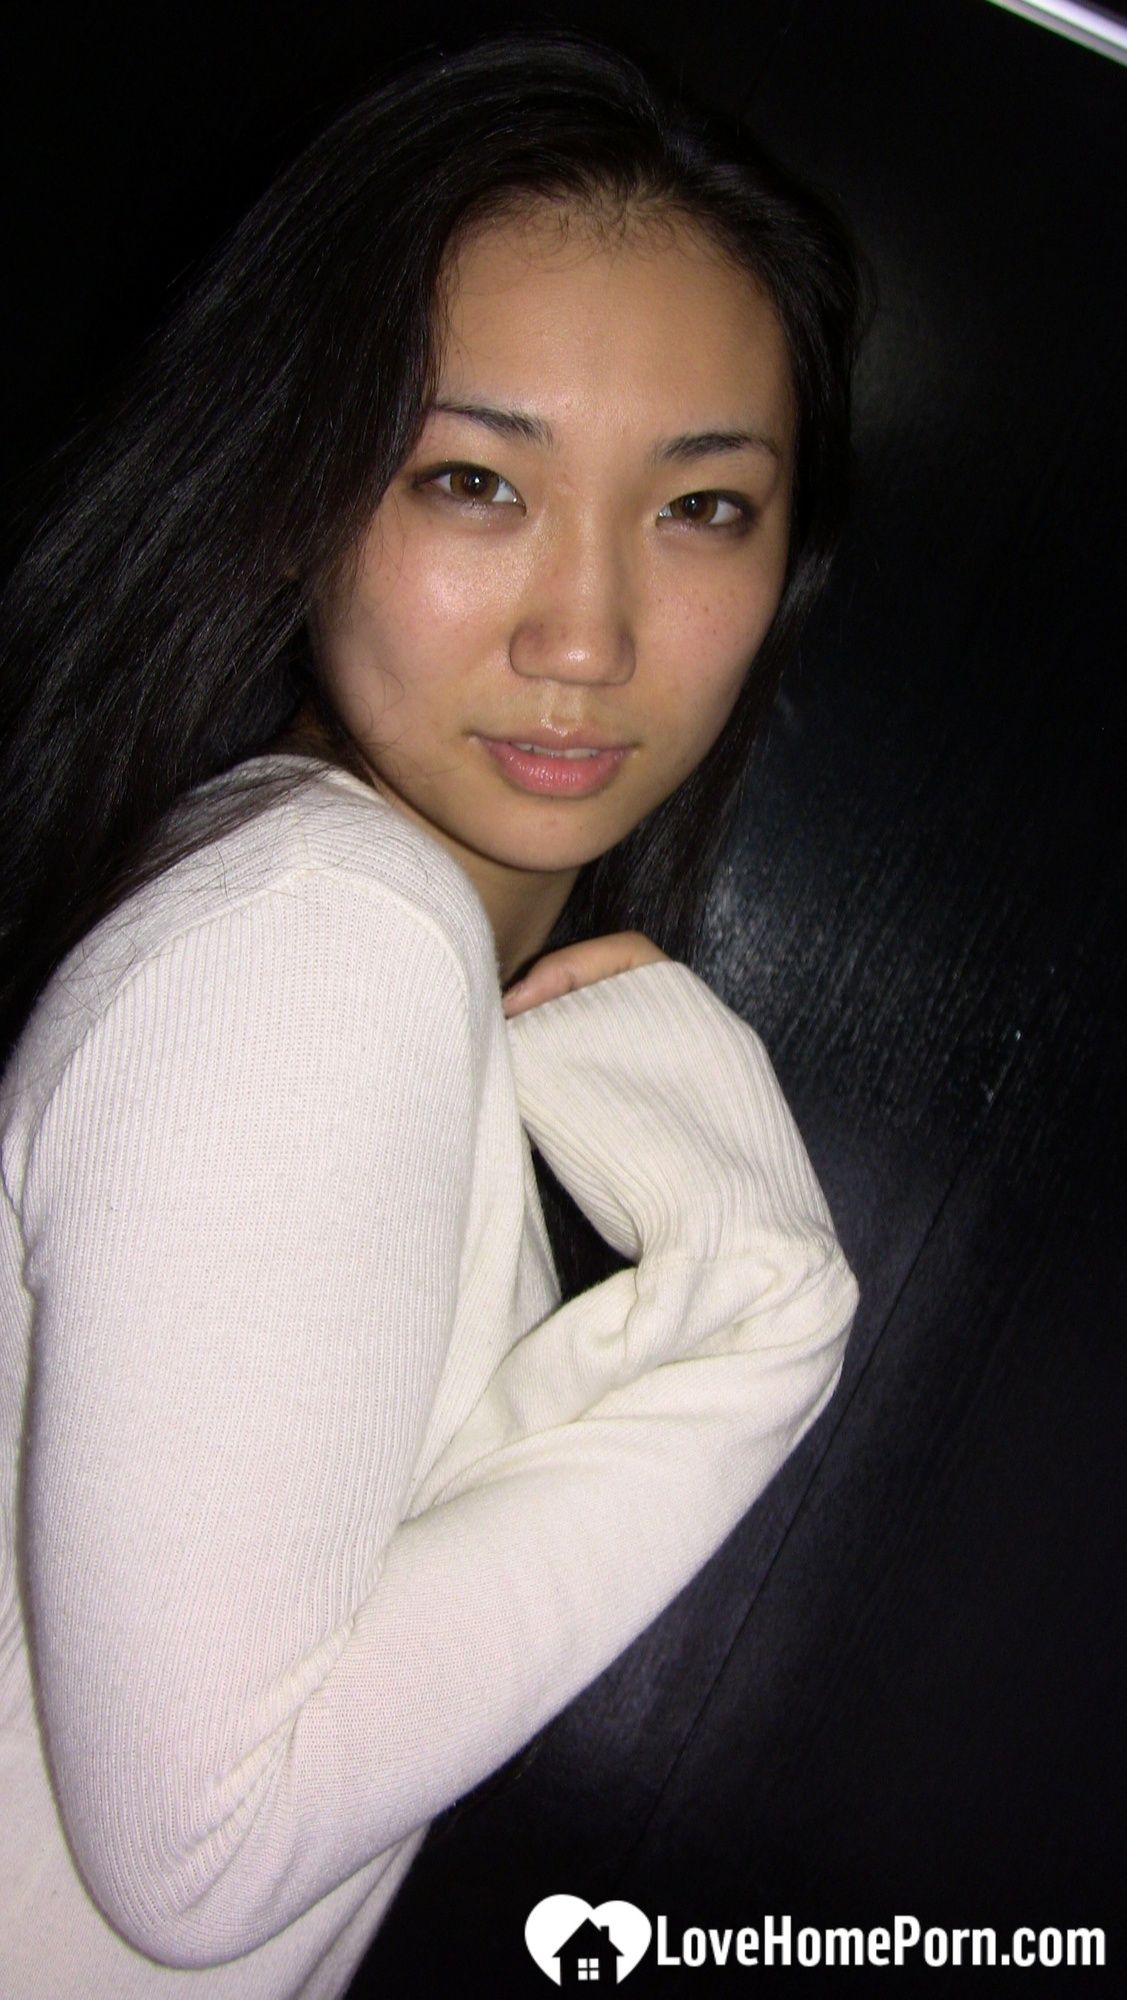 Lusty Asian girlfriend enjoys showing off on camera #19